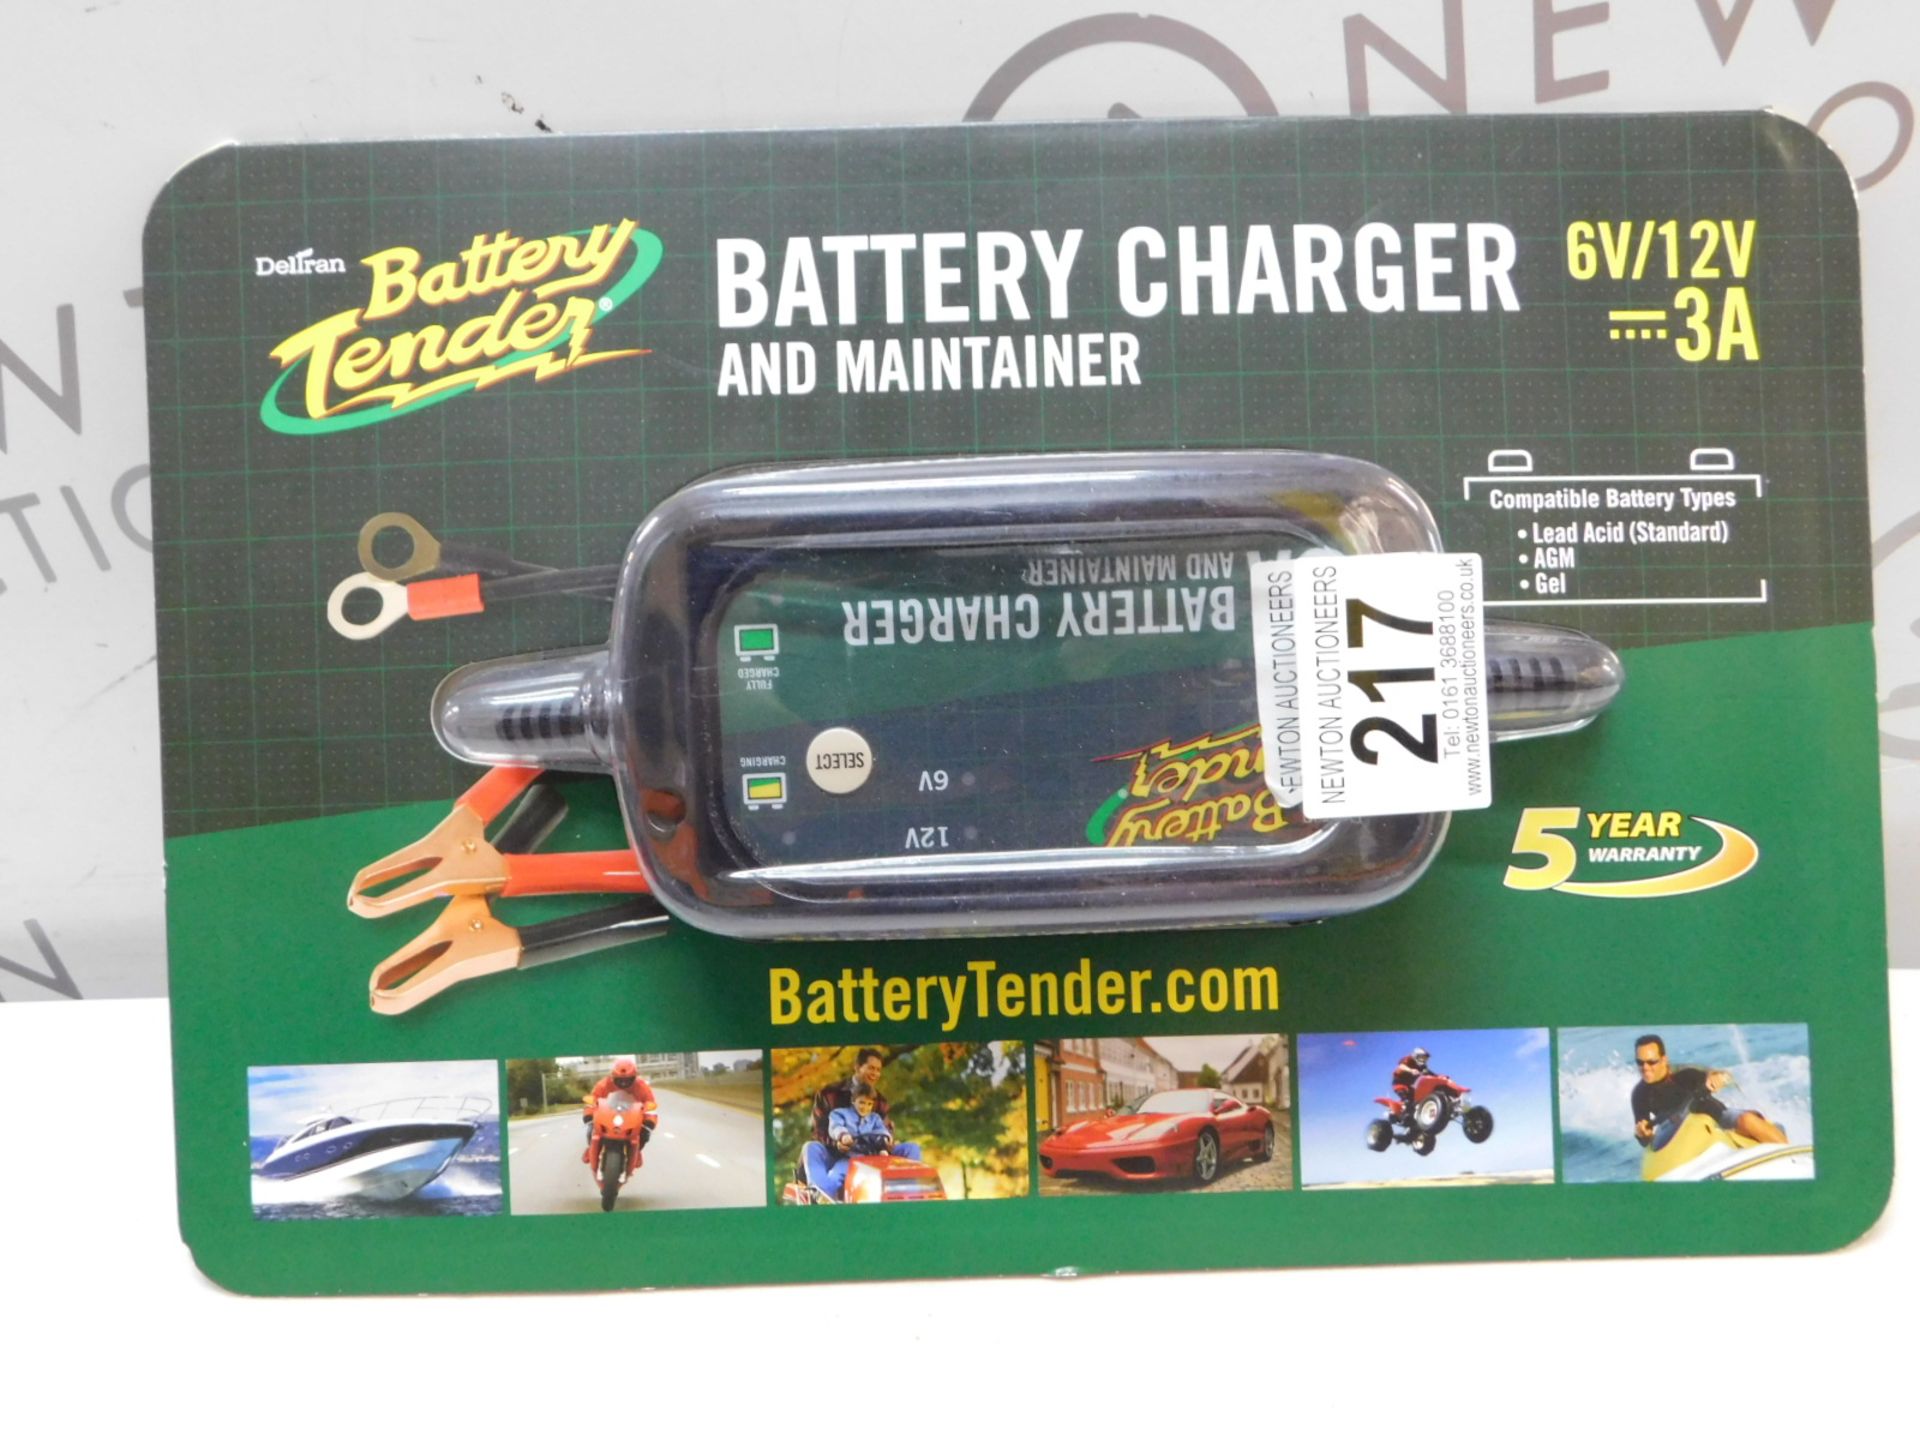 1 PACK OF BATTERY TENDER 6V/ 12V BATTERY CHARGER AND MAINTAINER RRP £49.99